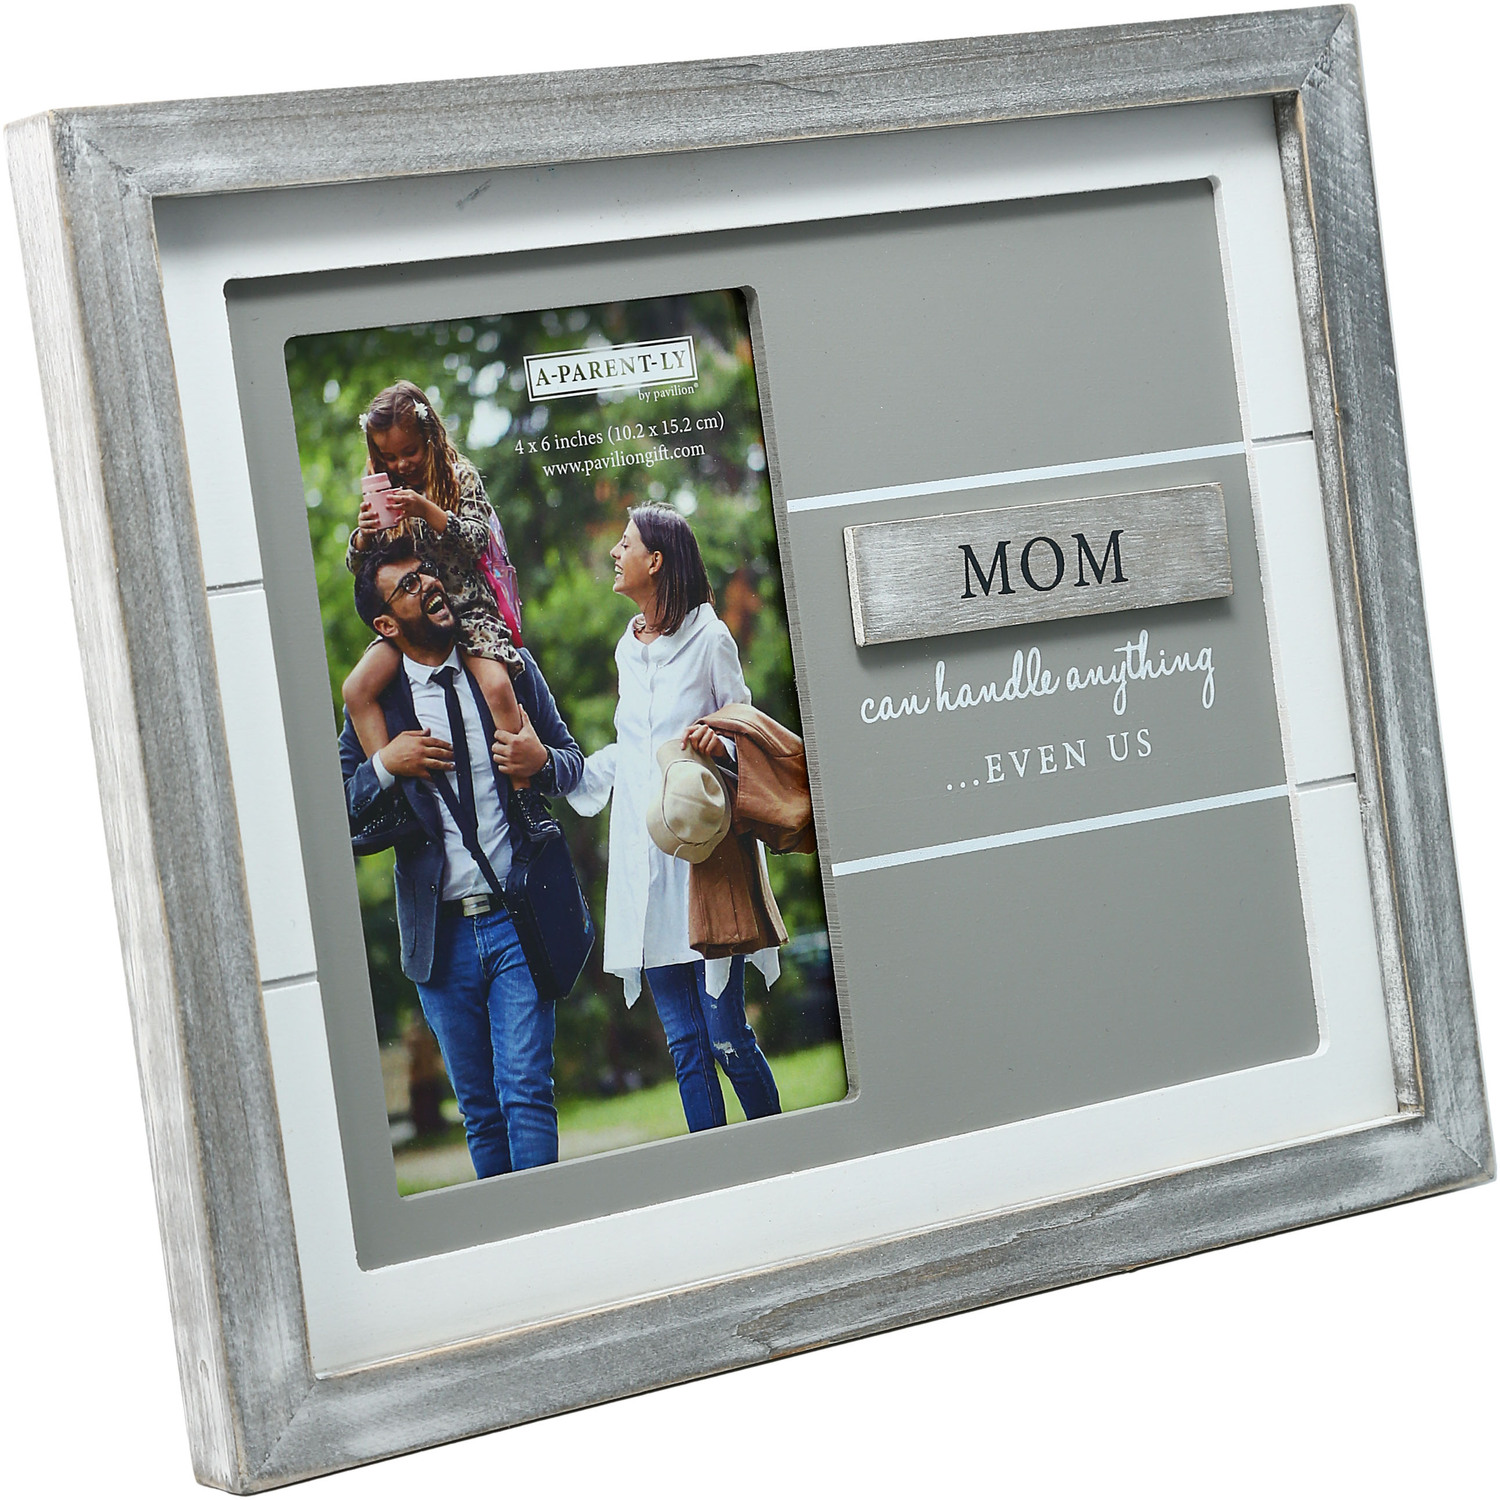 Mom by A-Parent-ly - Mom - 9.75" x 8.25" Frame (Holds 4" x 6" Photo)